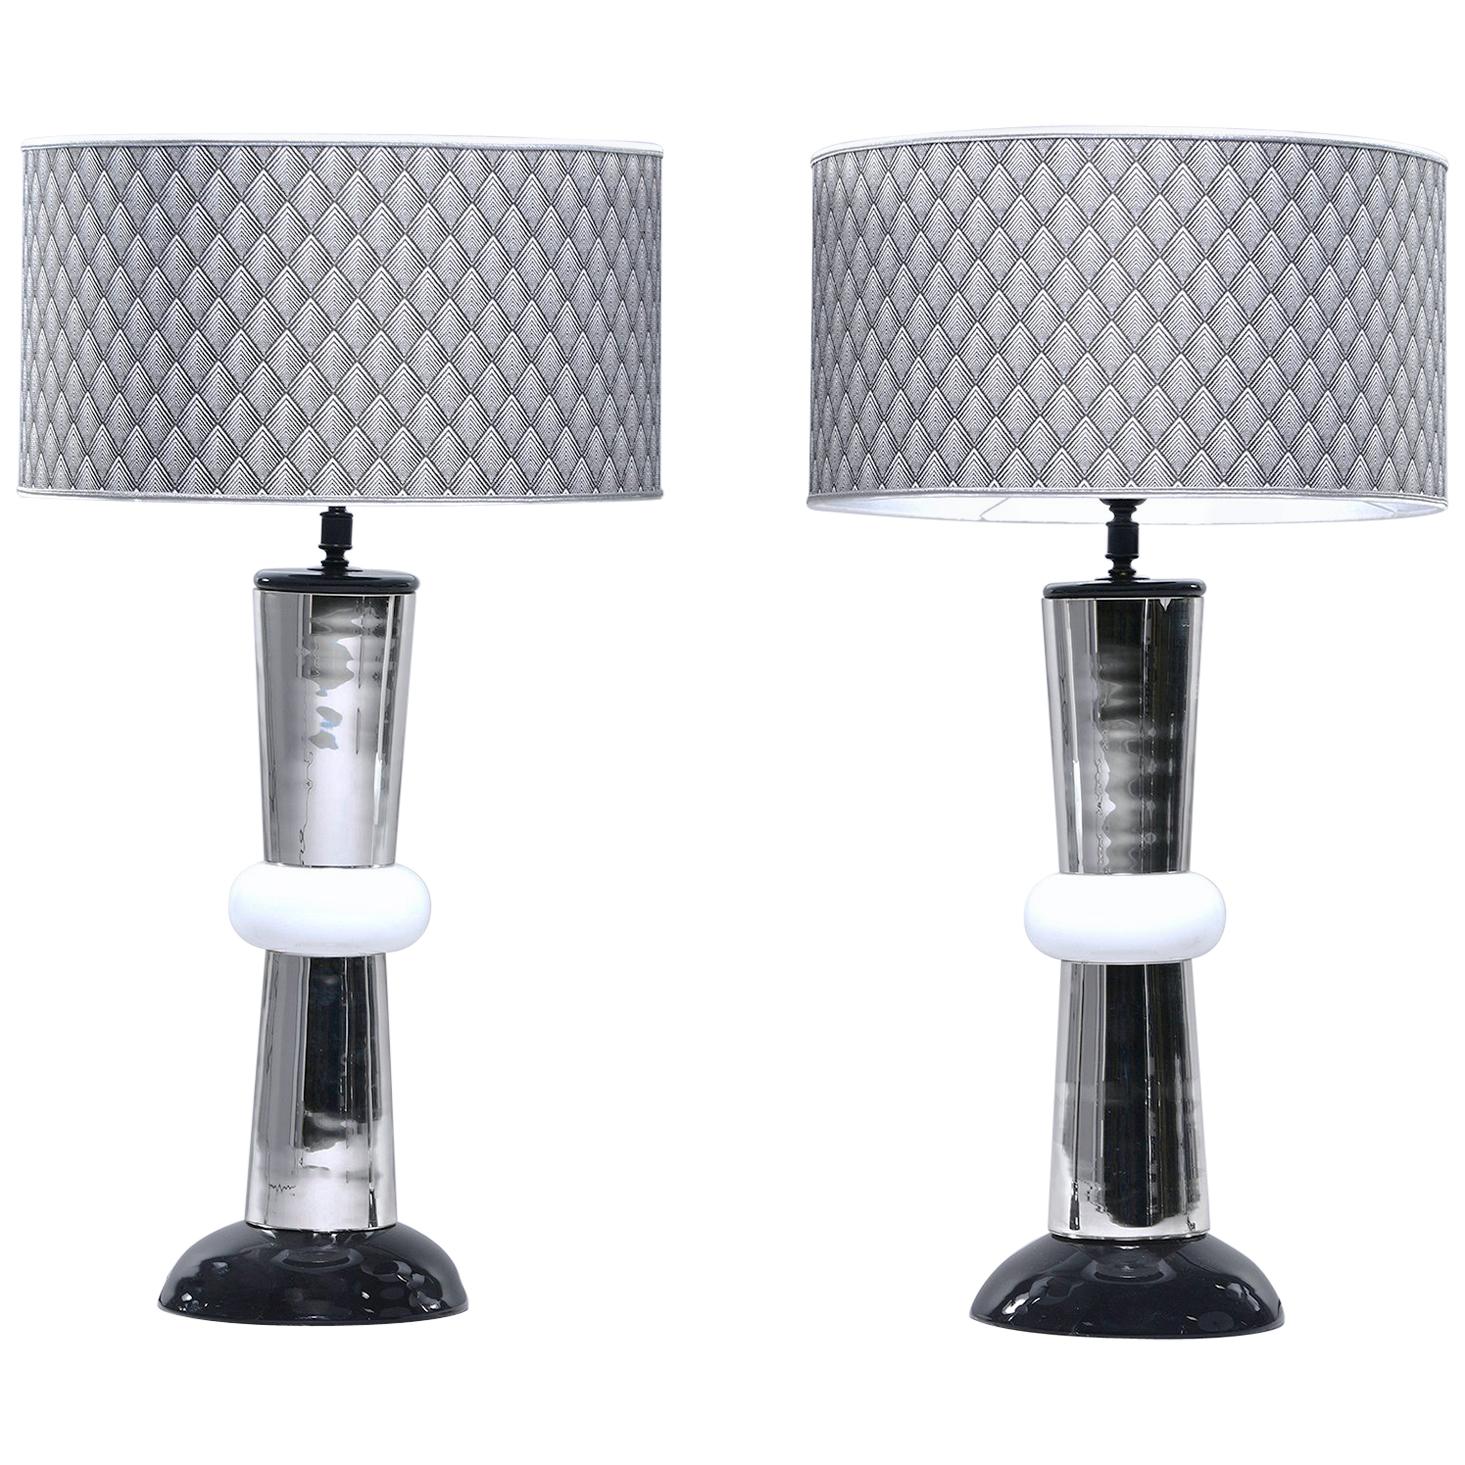 Pair of Italian Silver and White Glass Lamps with Patterned Shades